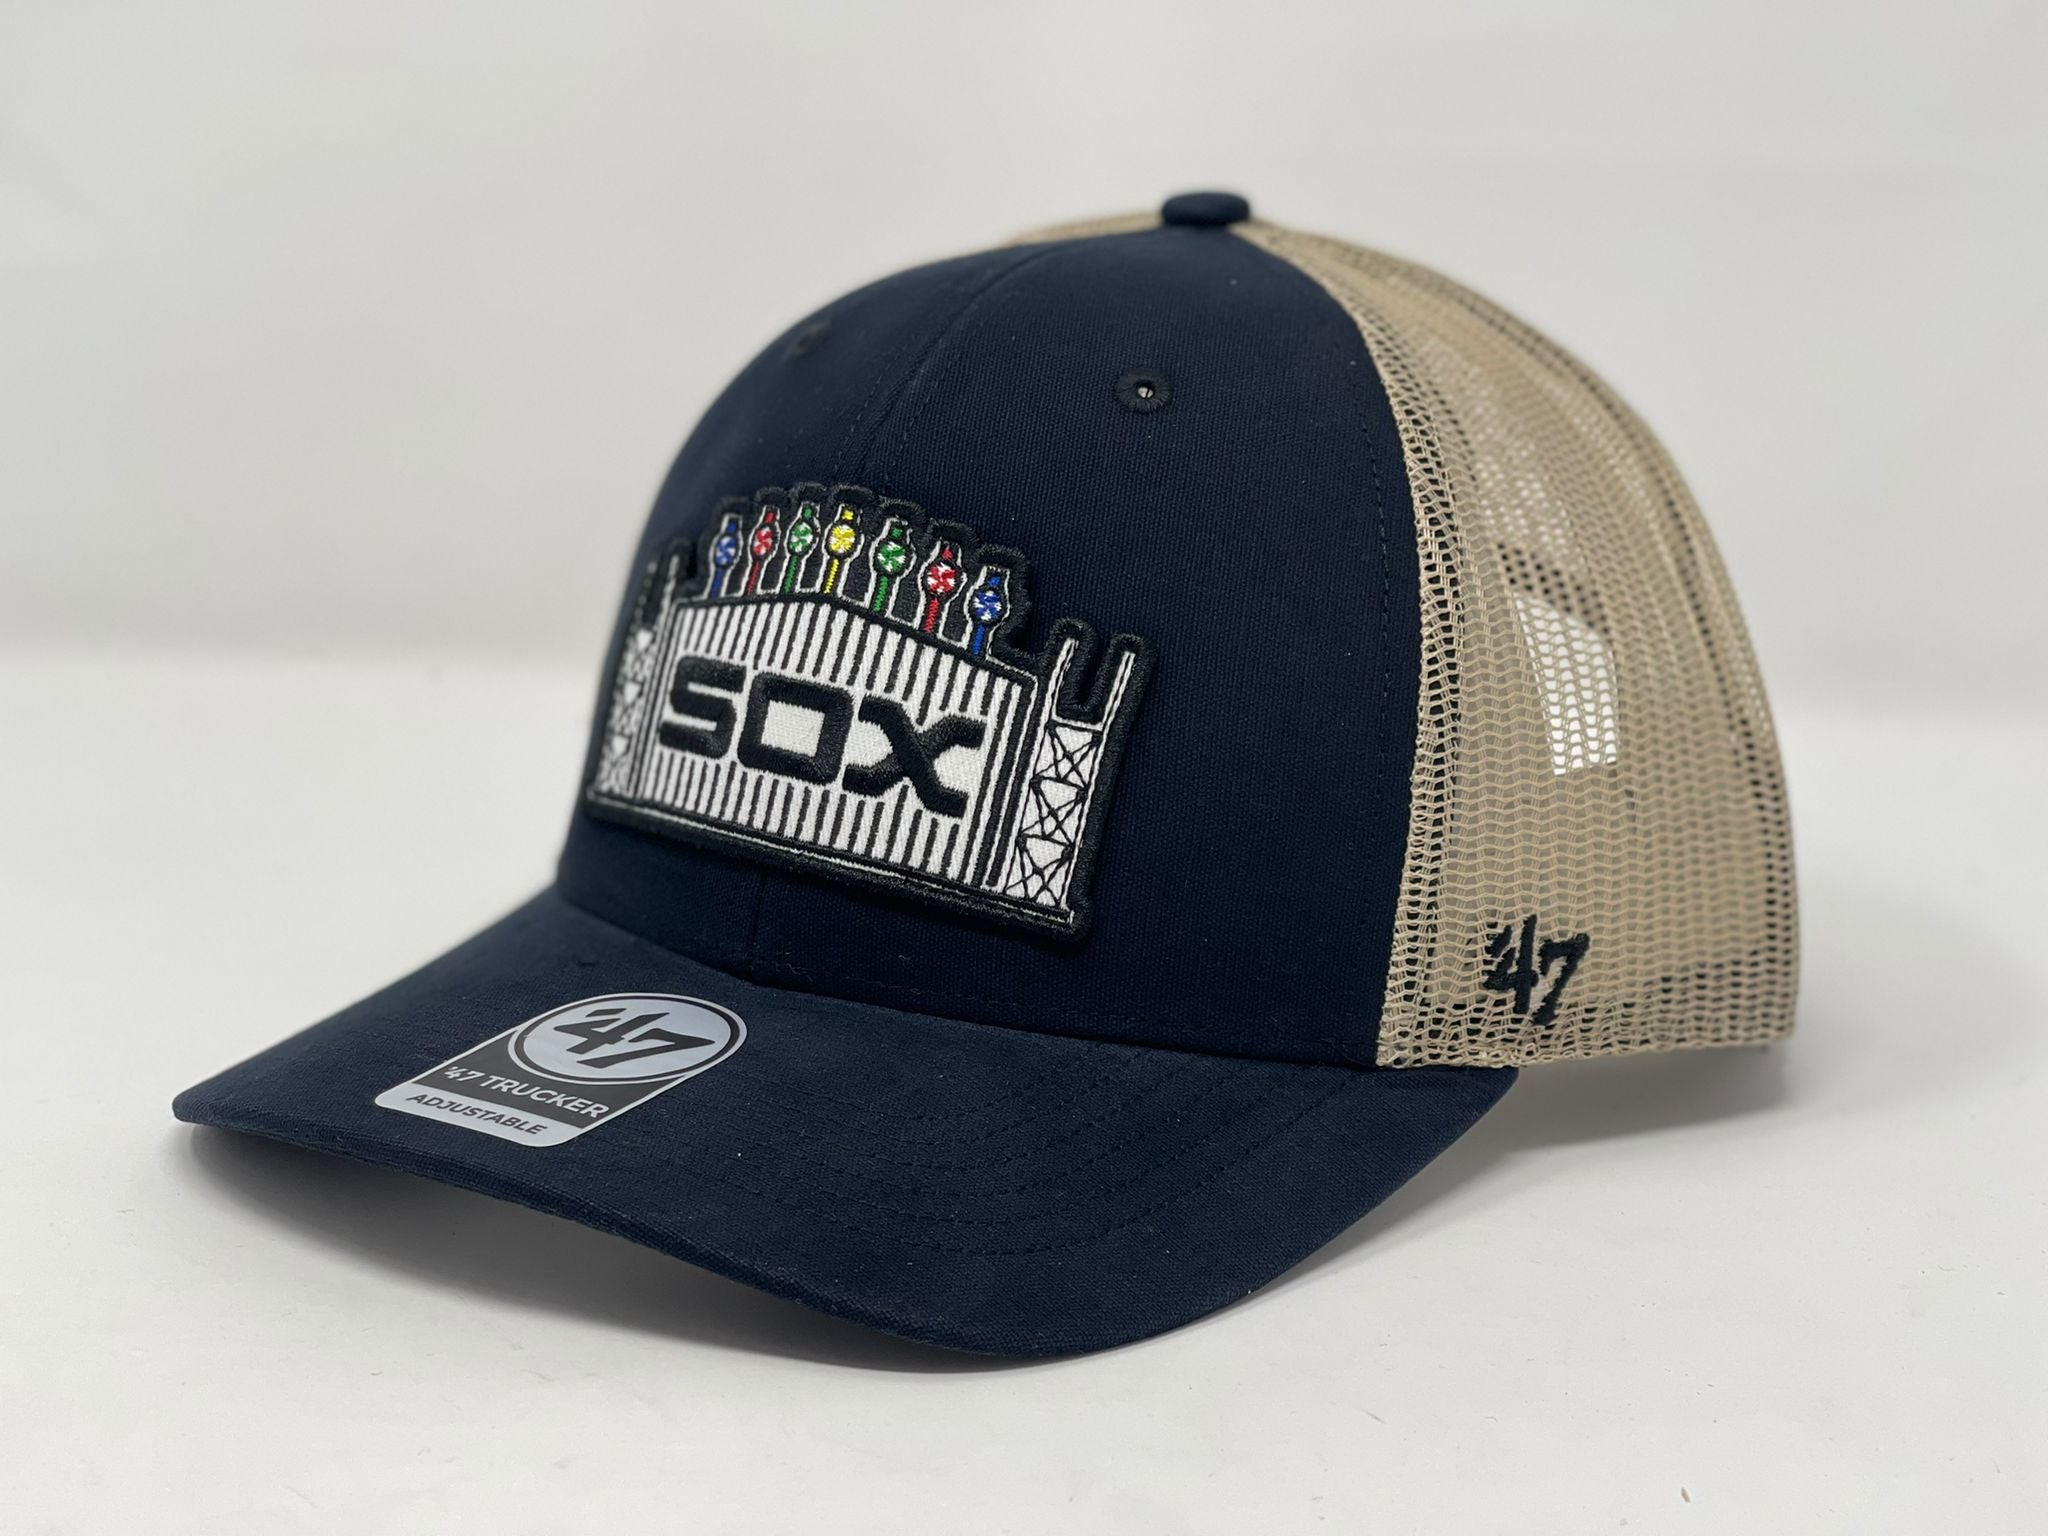 Chicago White Sox 47 Sure Shot MVP Snapback Cap – Day by day